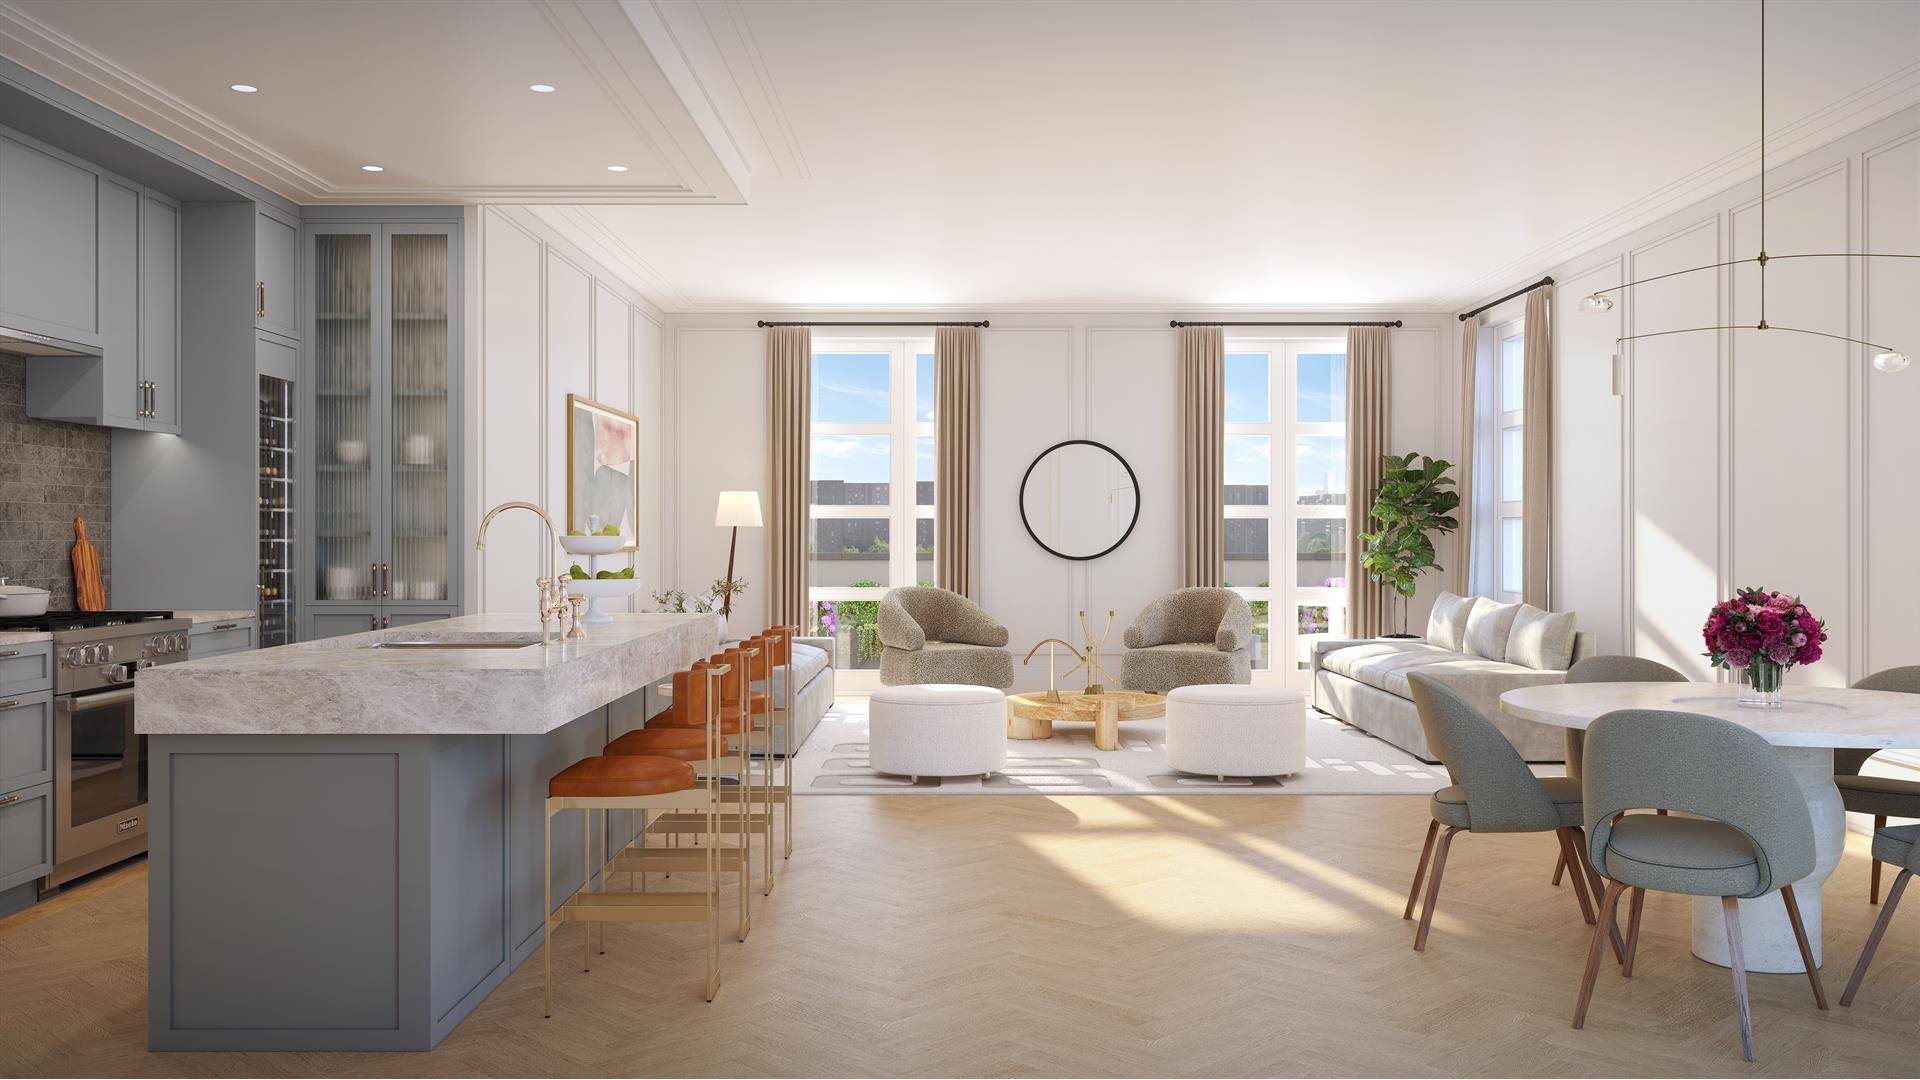 Residence 8F at The Edison Gramercy is a 724 square foot one bedroom, one bathroom home with interiors designed by acclaimed firm Paris Forino Interior Design.